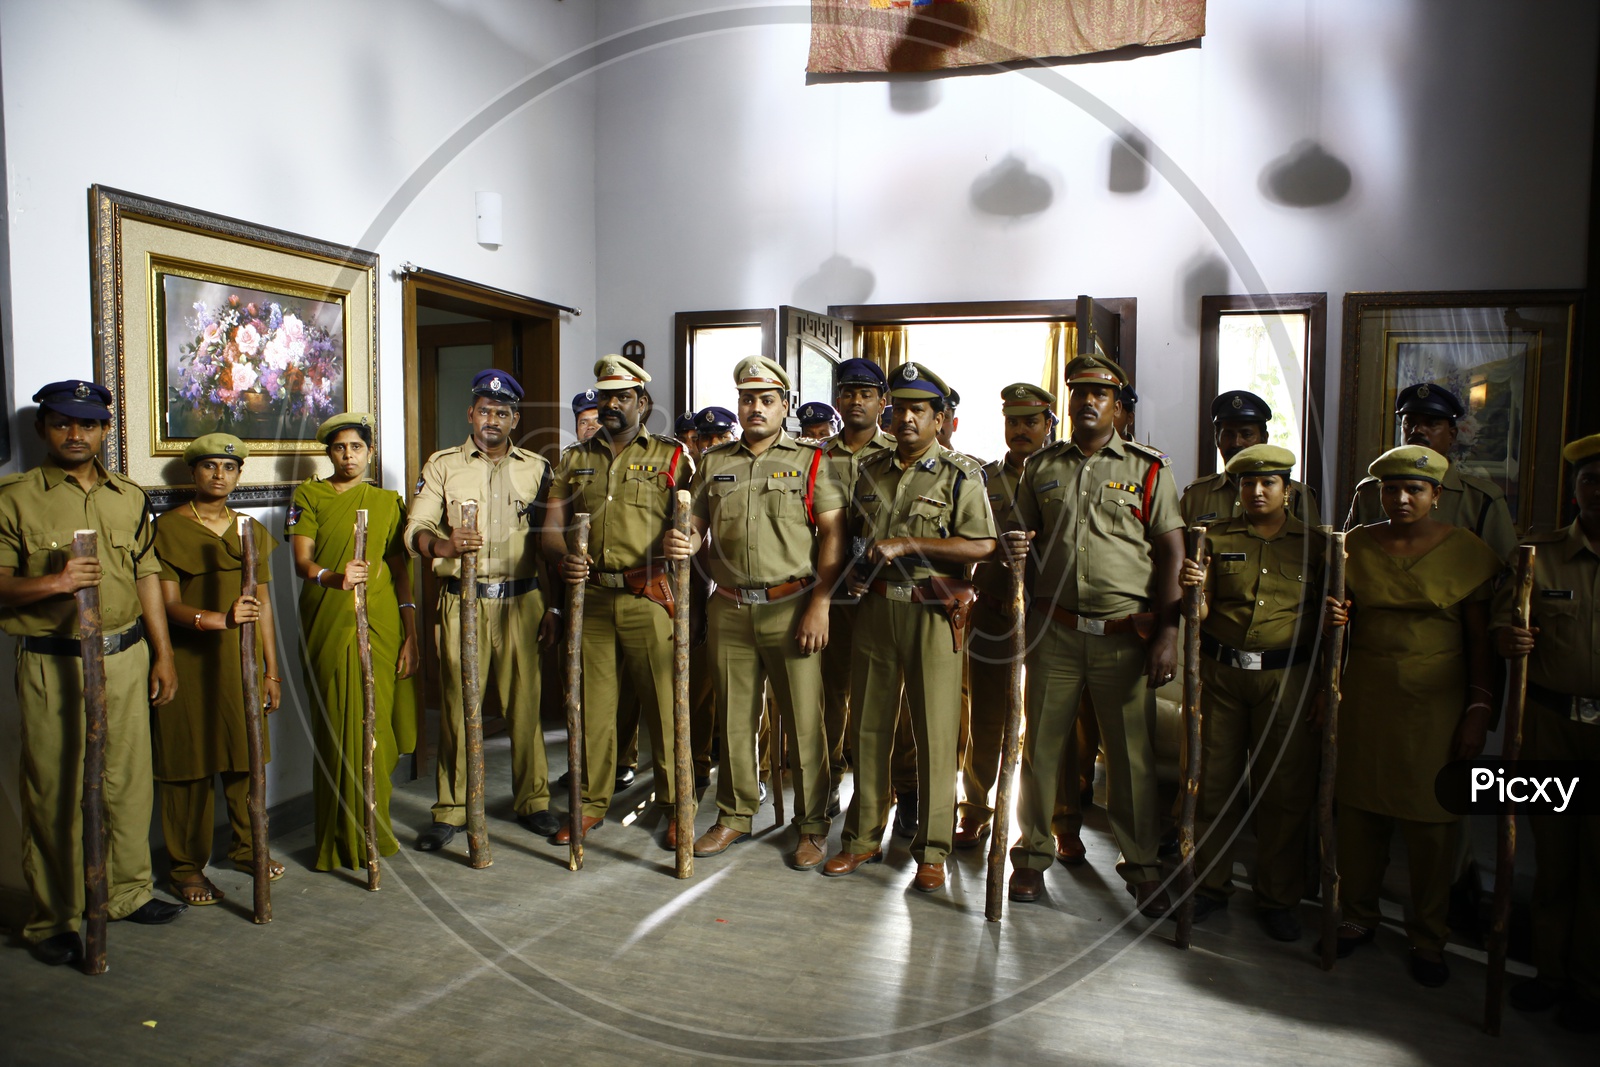 Police Man And Woman Holding Wooden Sticks In Hand in a Police Station